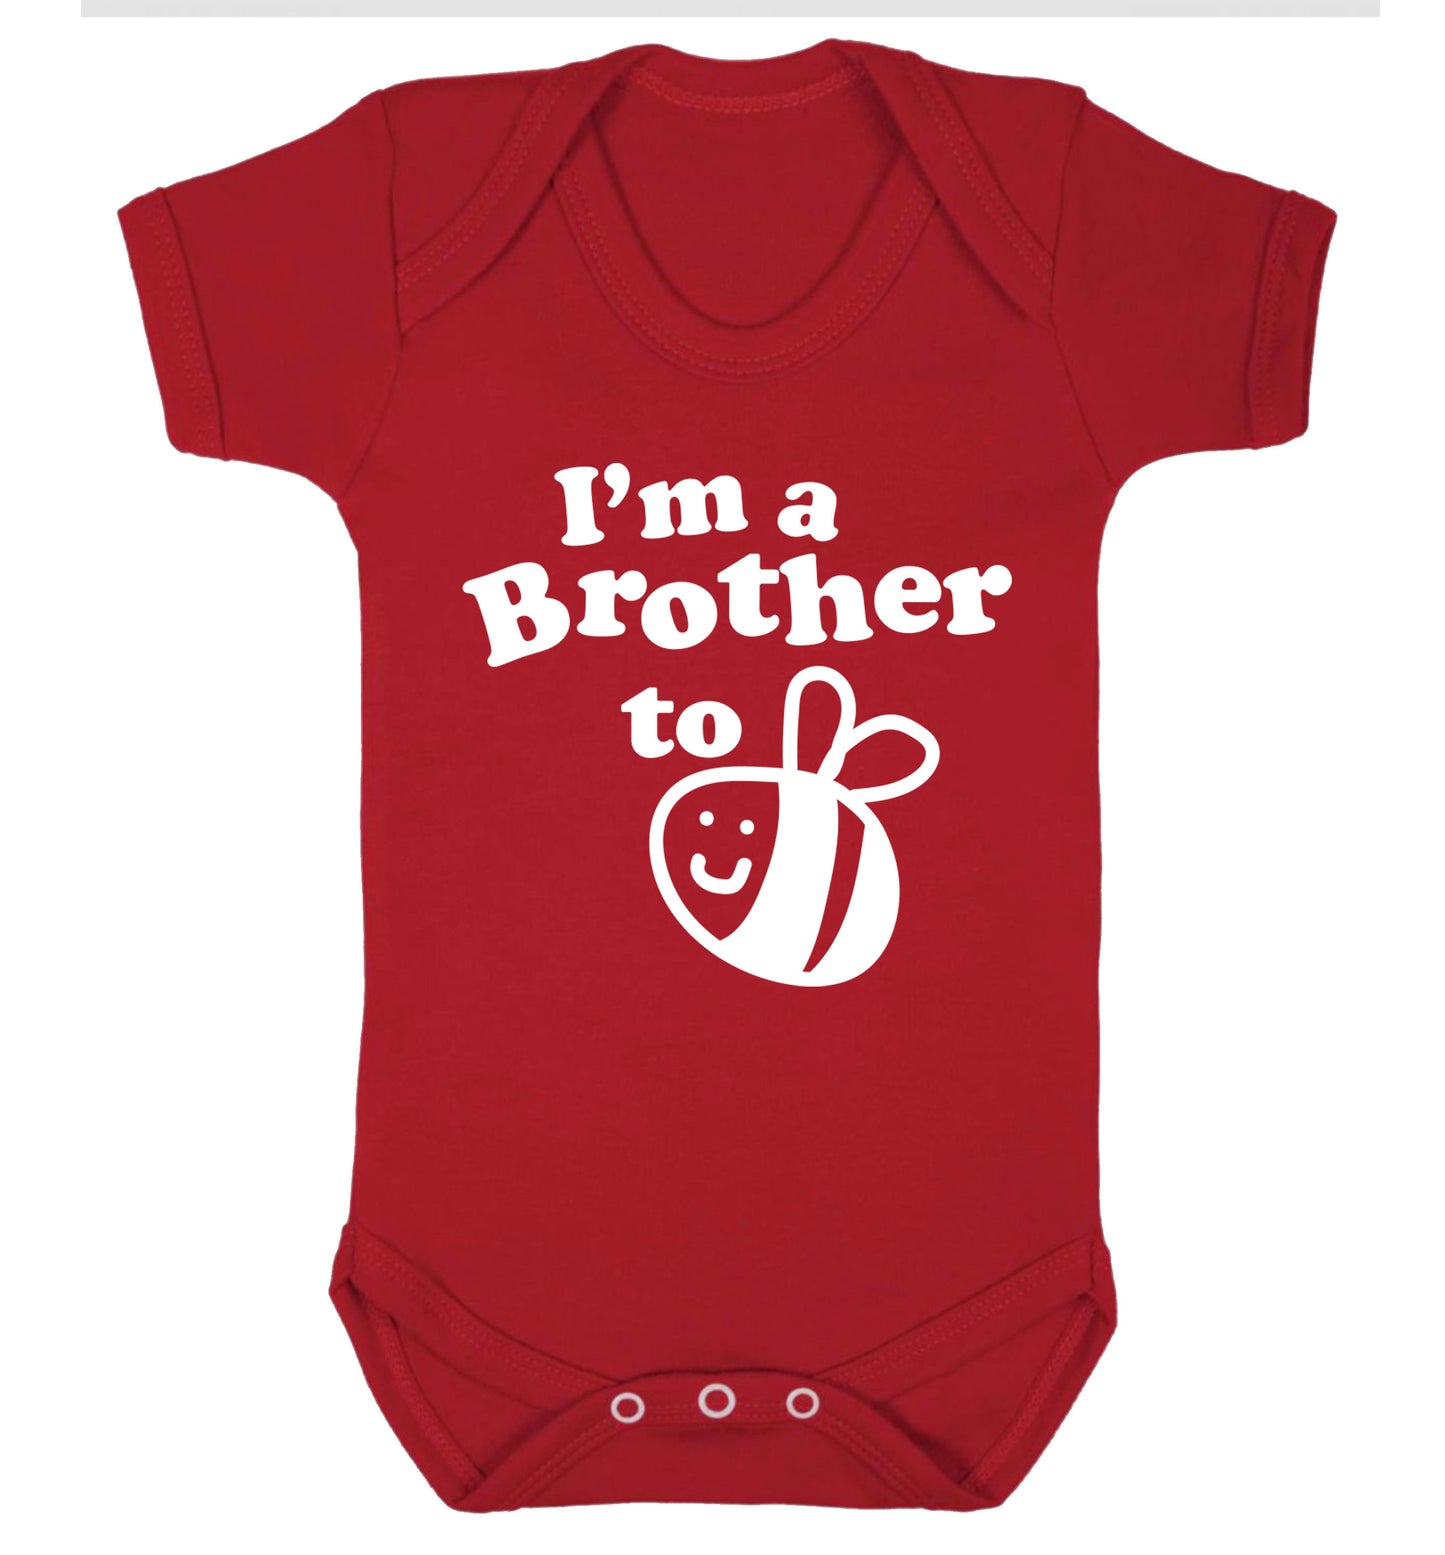 I'm a brother to be Baby Vest red 18-24 months